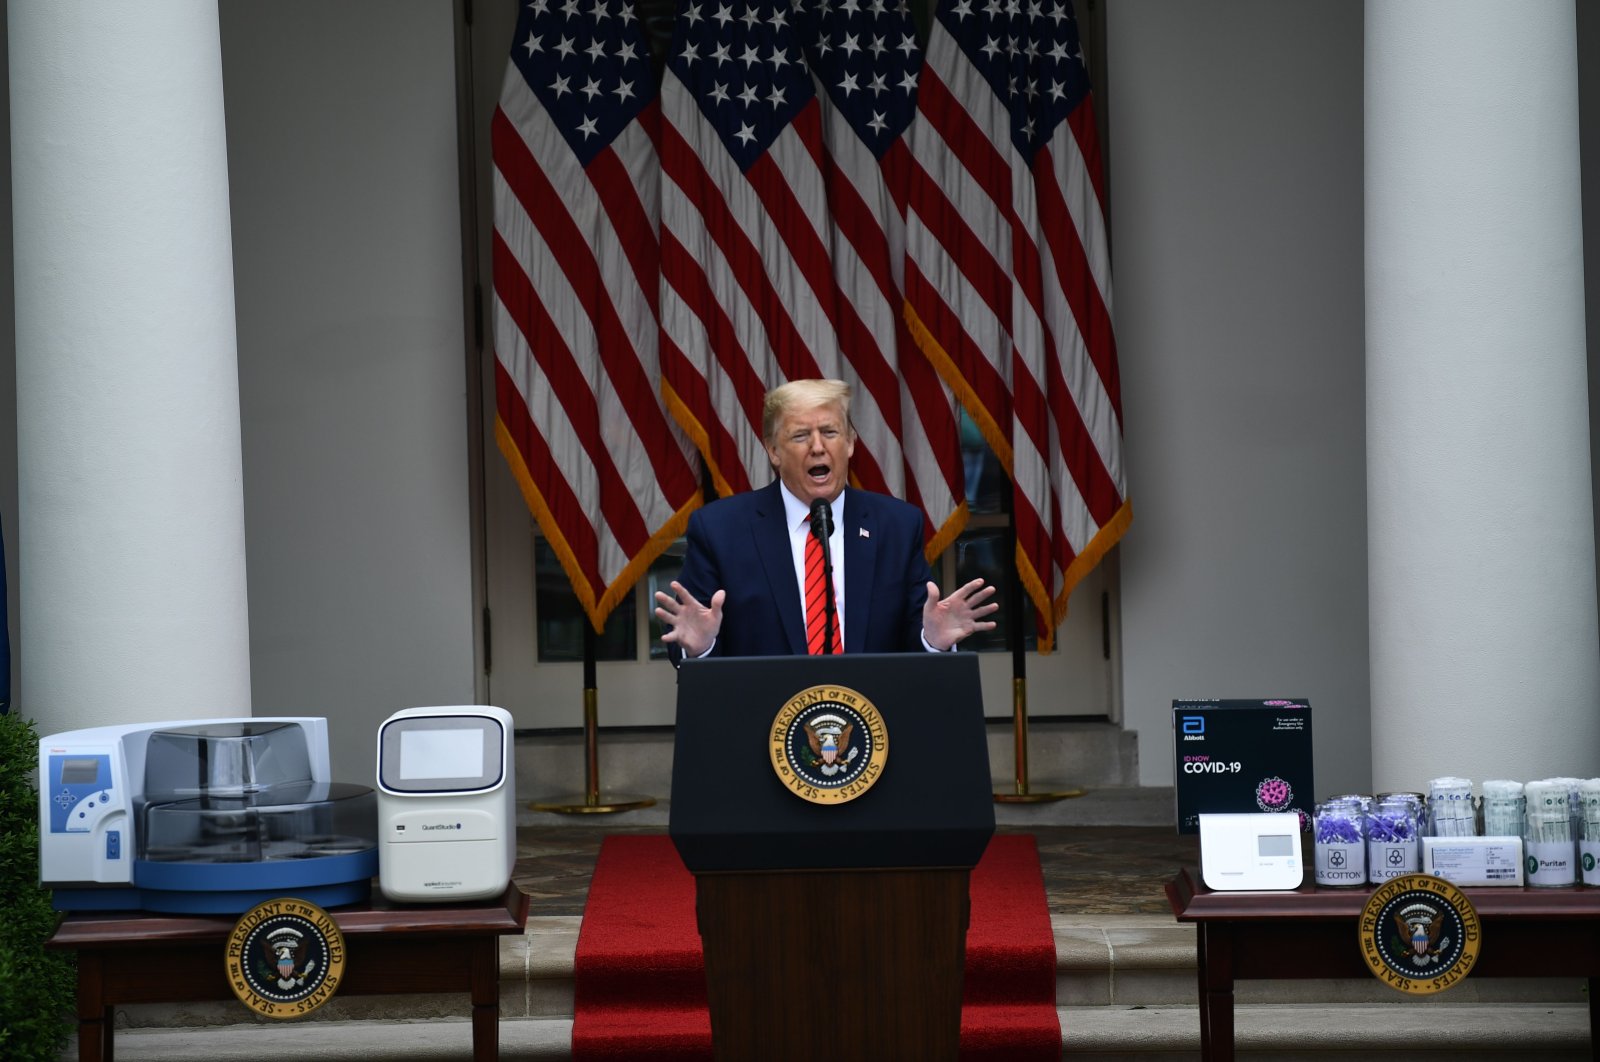 US President Donald Trump speaks during a news conference on the novel coronavirus, COVID-19, in the Rose Garden of the White House in Washington, DC on May 11, 2020. (AFP Photo)